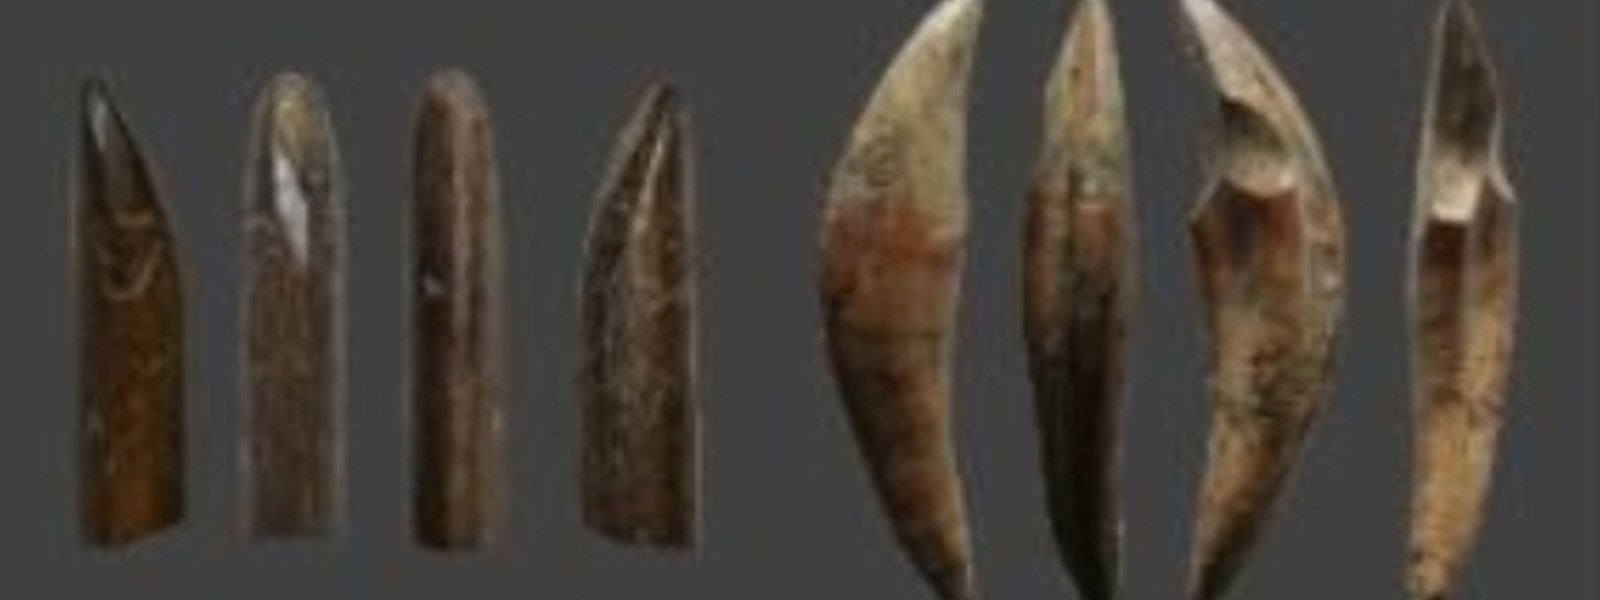 Early humans in SL used tools to hunt